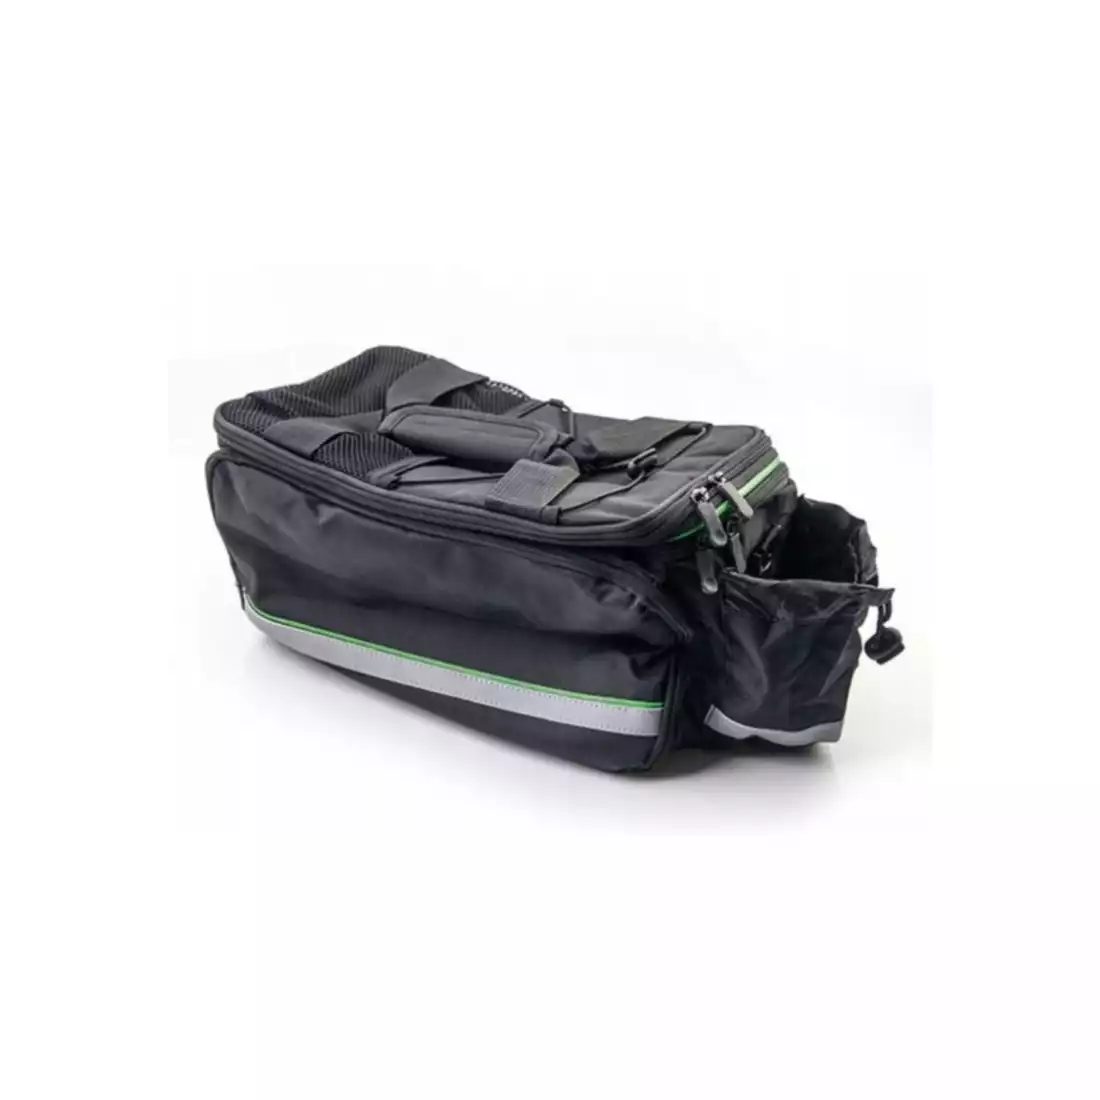 bicycle pannier for the trunk 20l, black and green